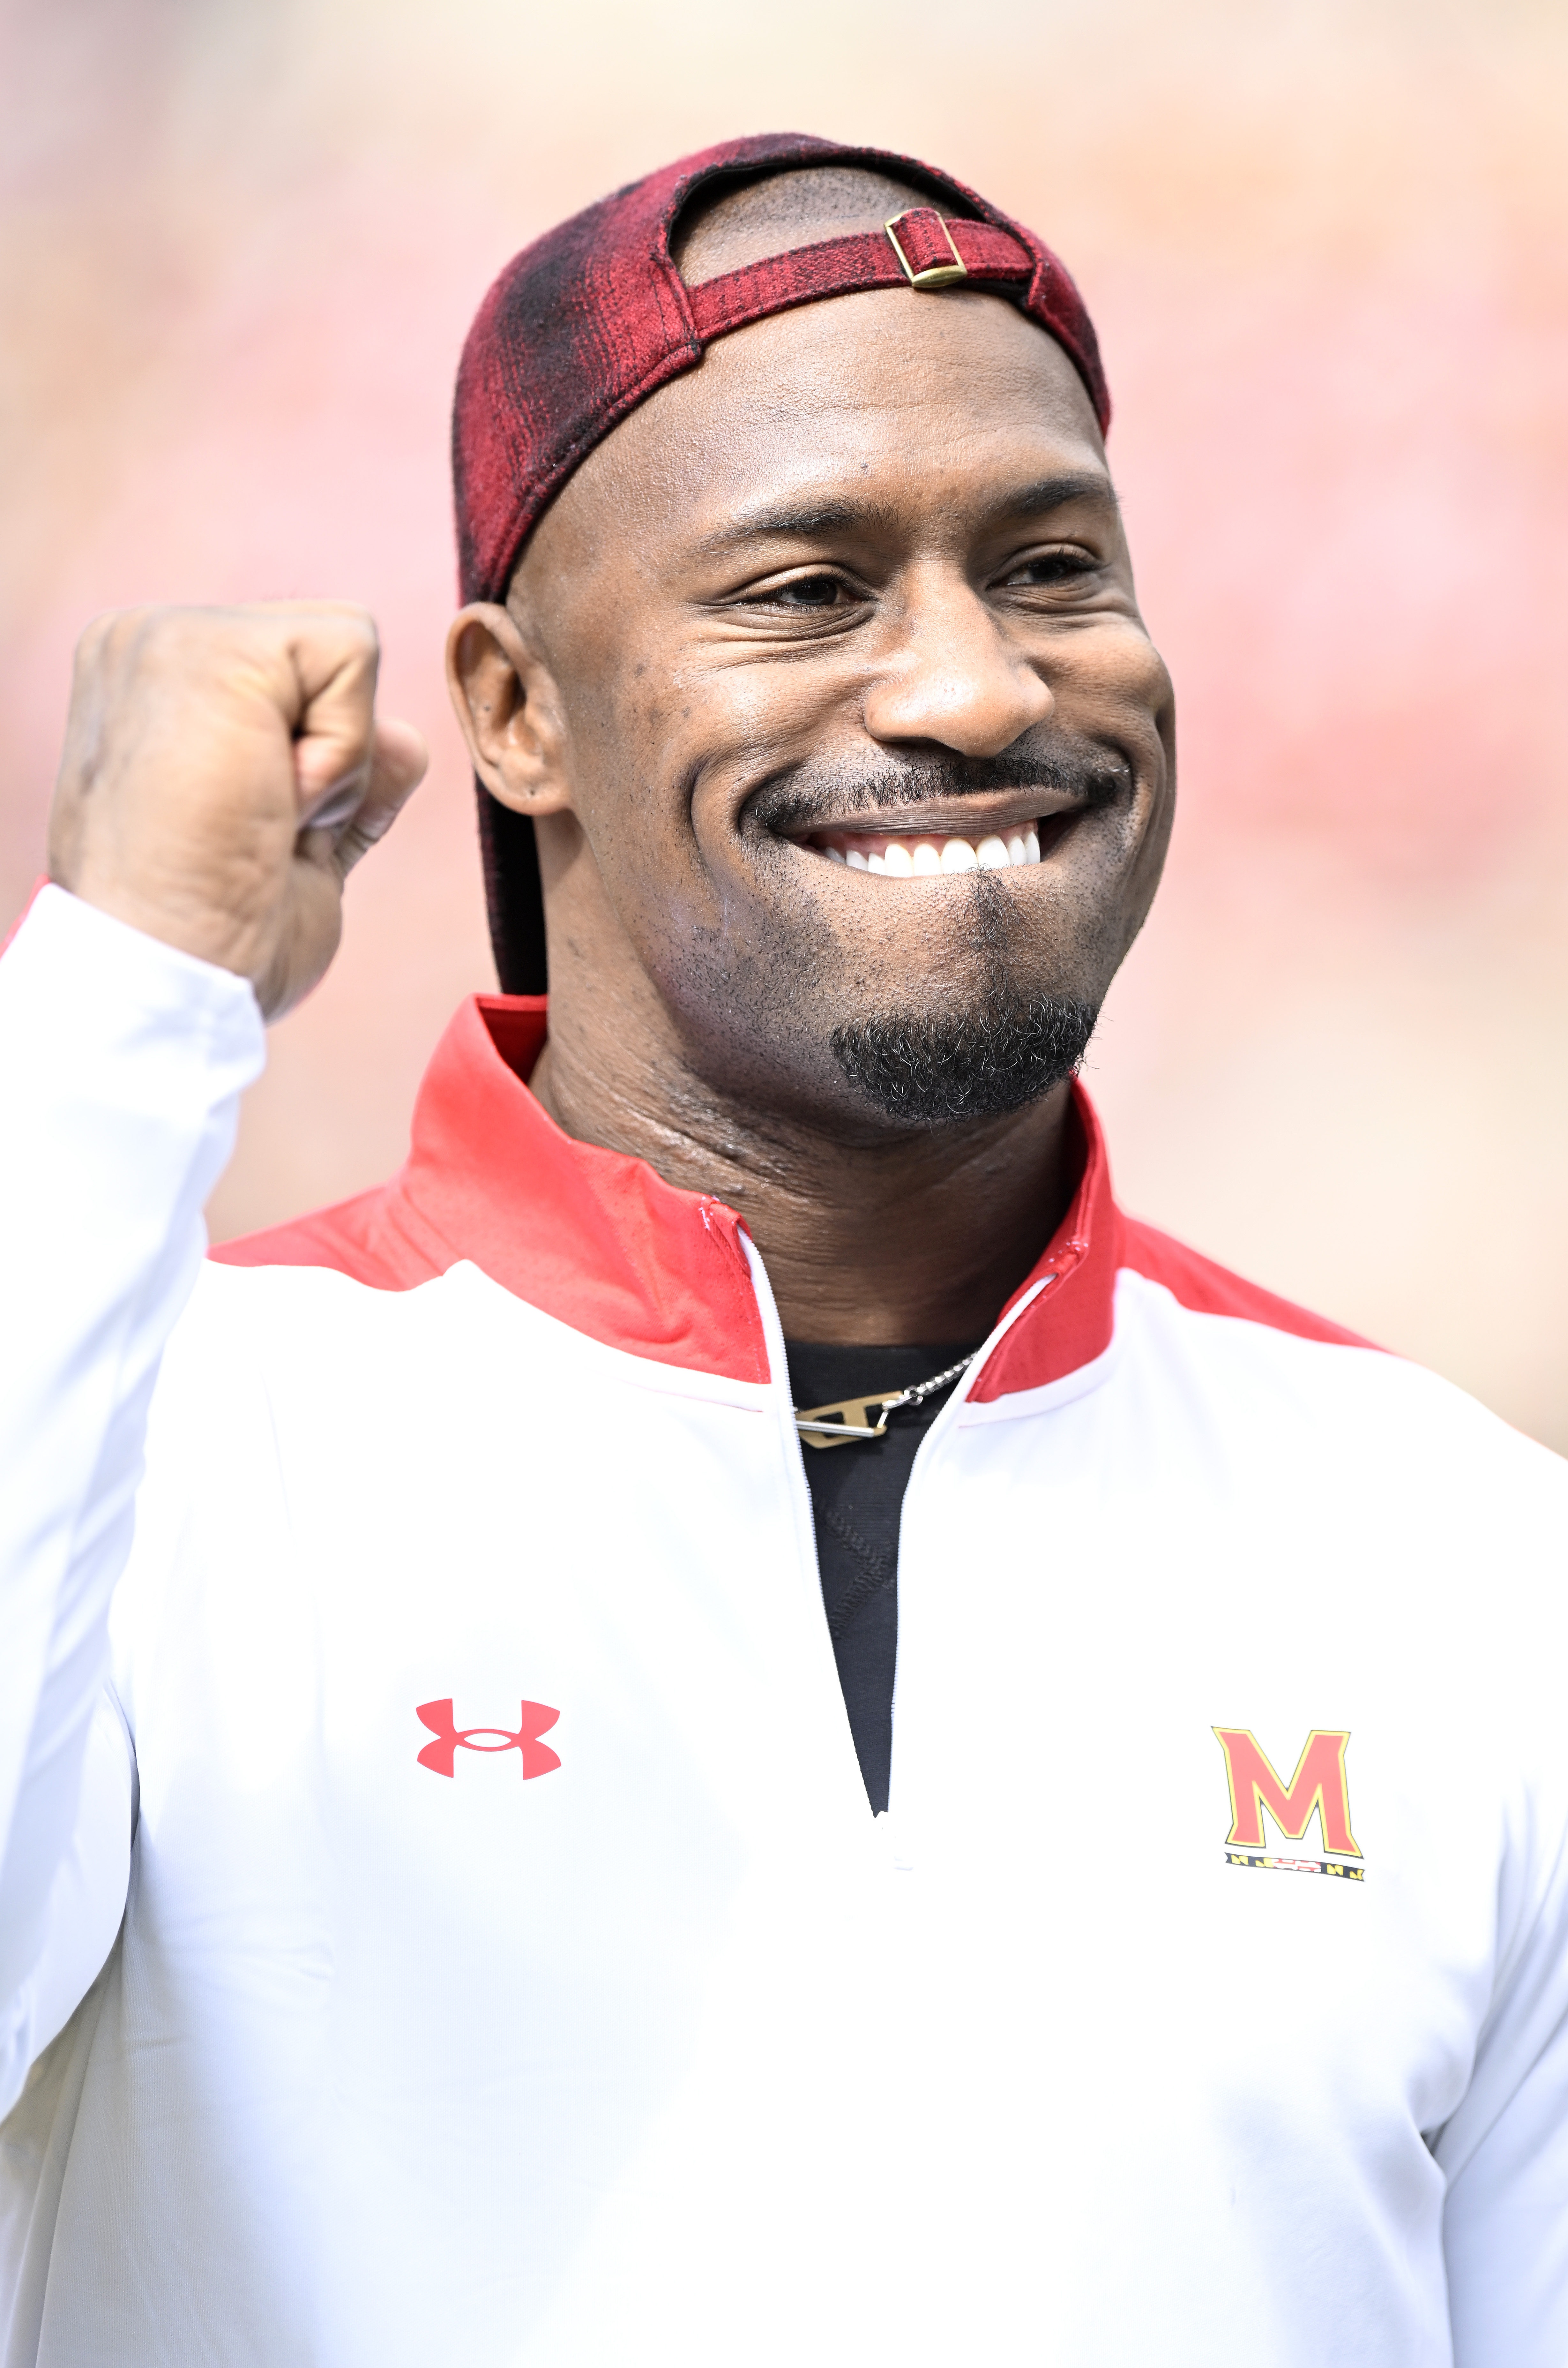 Vernon Davis is introduced to the crowd during the game against the Purdue Boilermakers at SECU Stadium on October 8, 2022, in College Park, Maryland. | Source: Getty Images